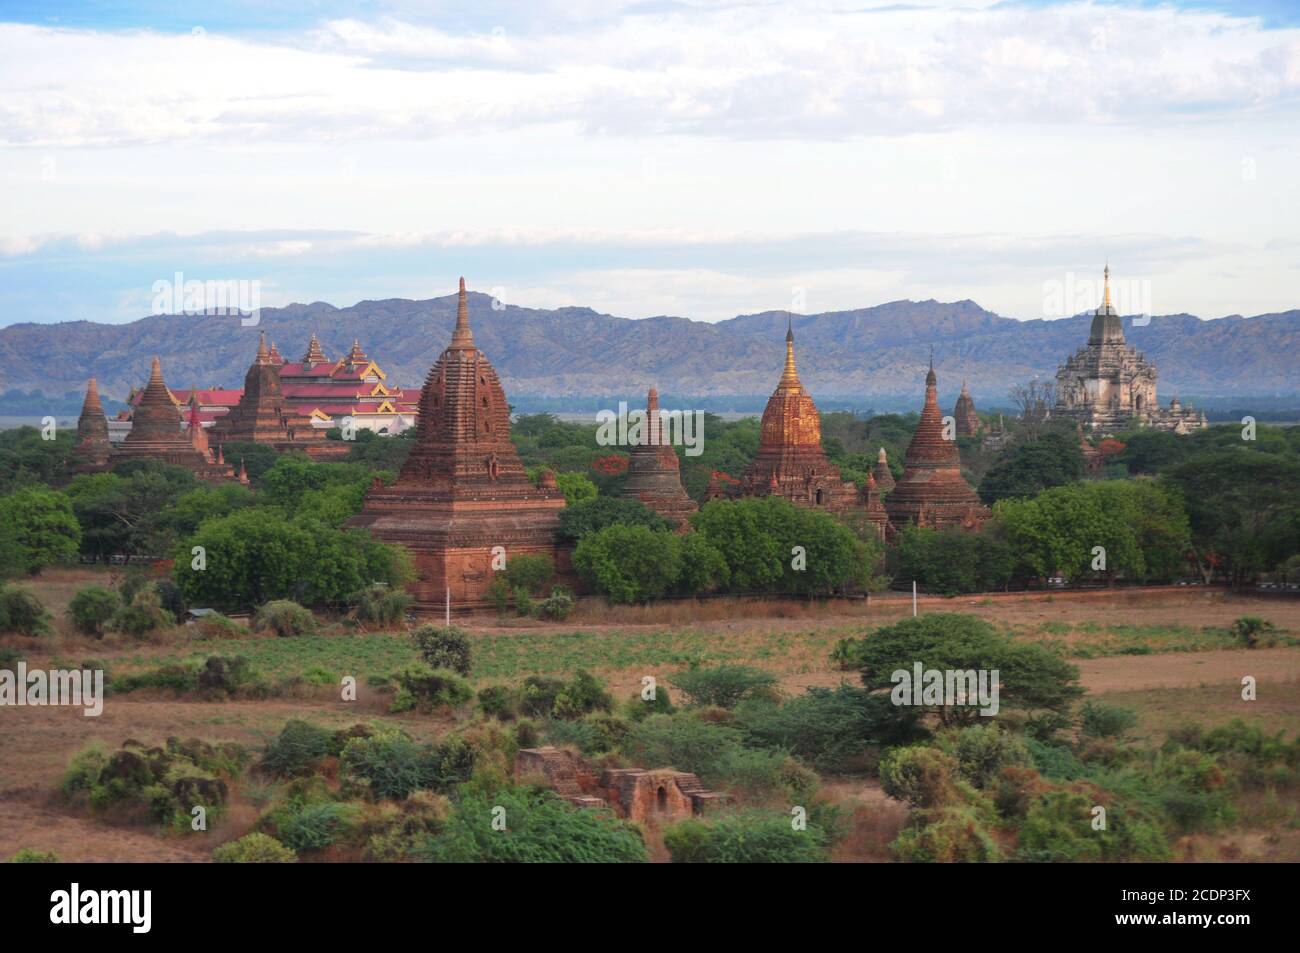 The Old Bagan scenery surrounded by pagodas and temples with lush greens Stock Photo